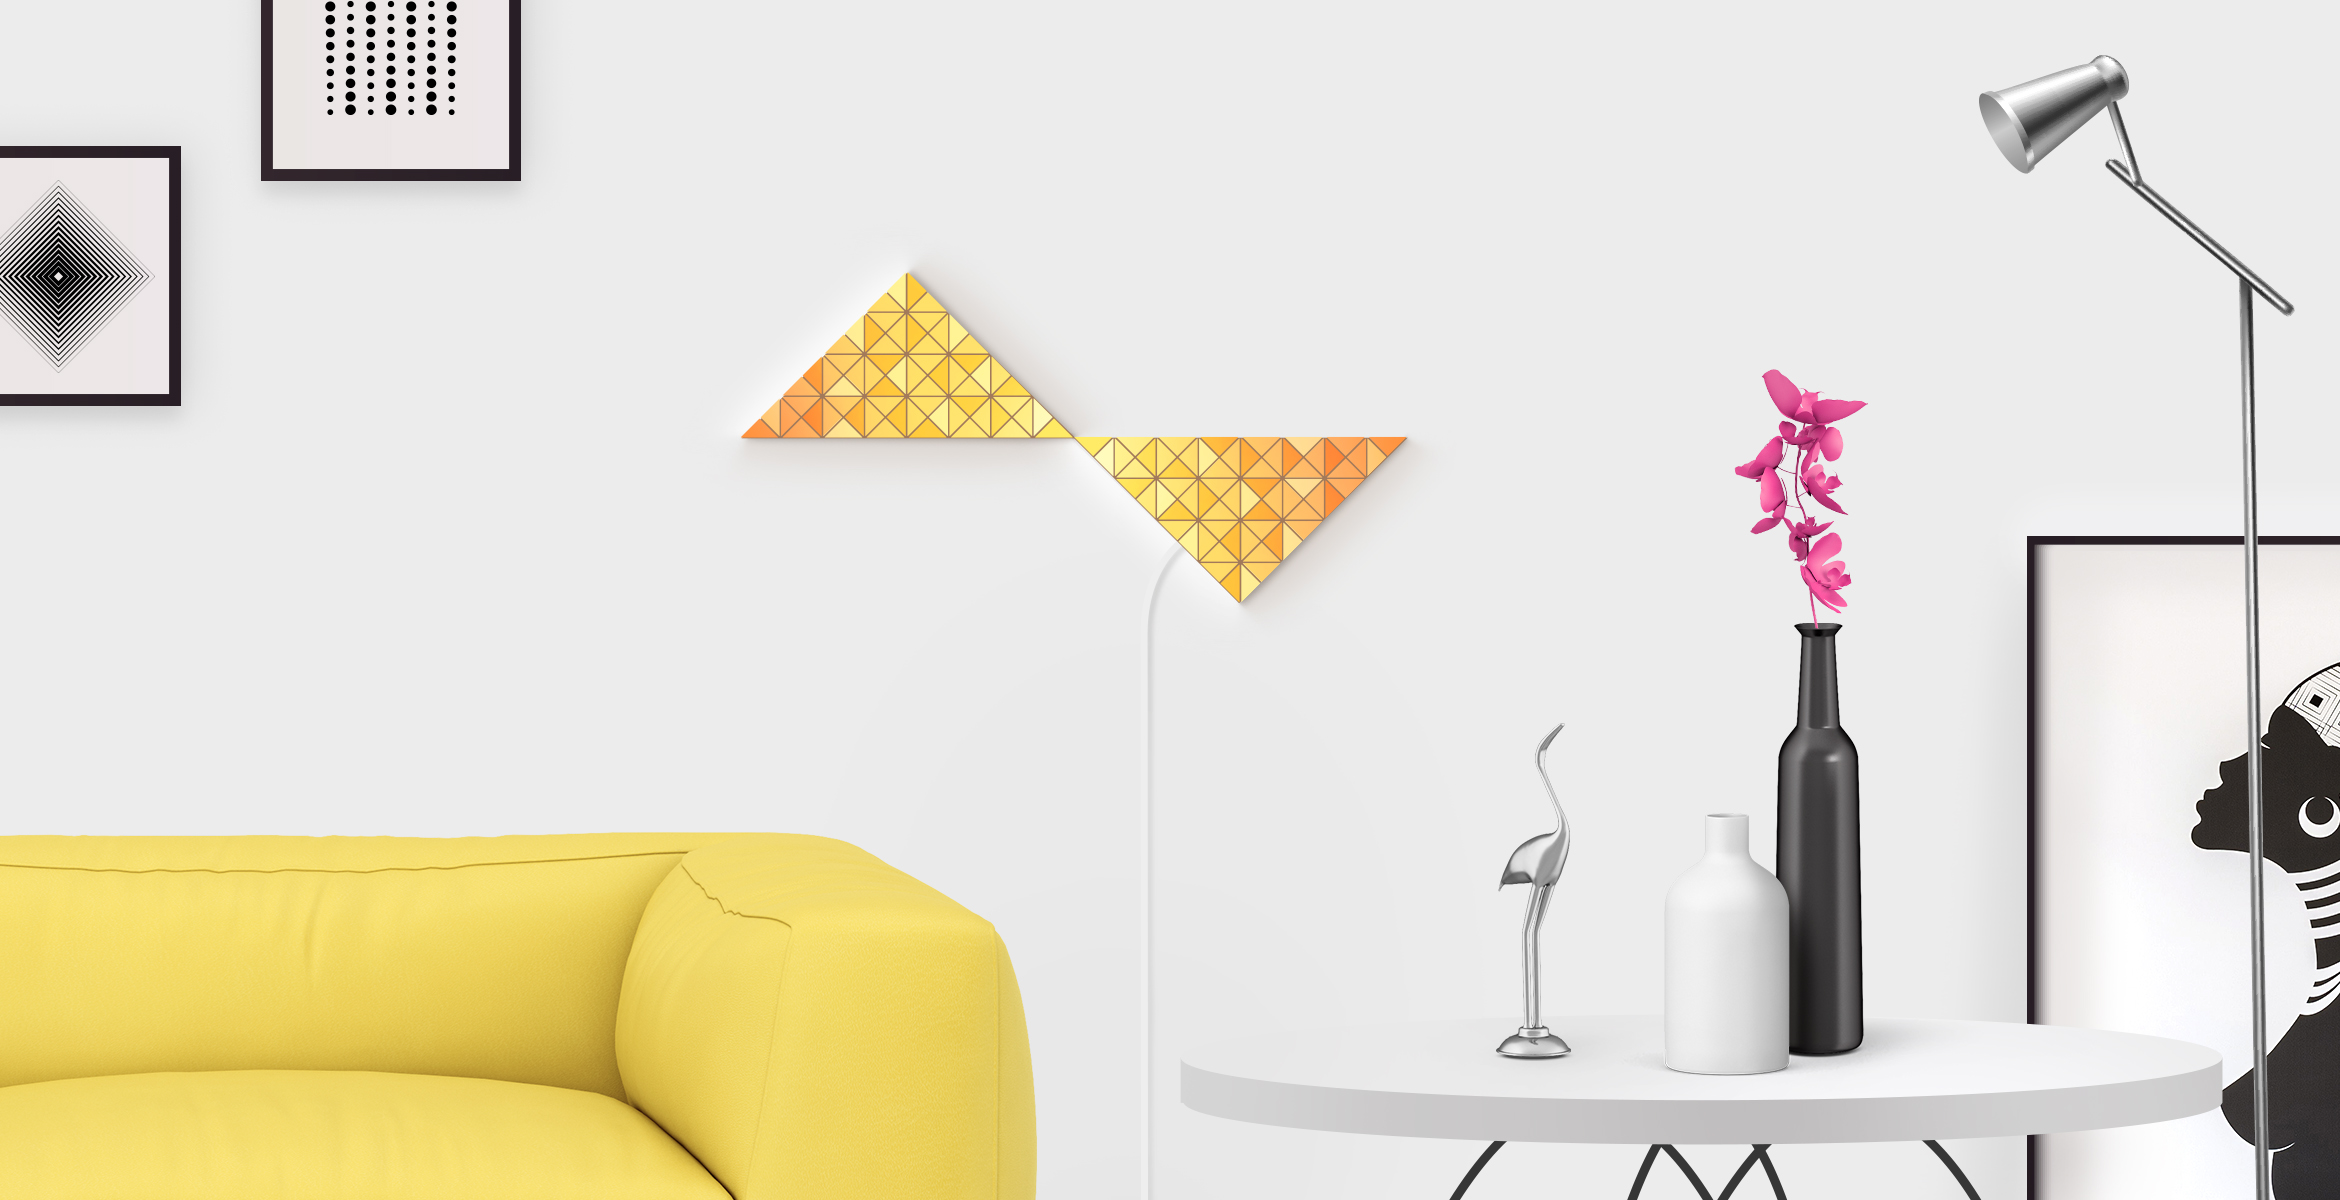 Inversion shape in yellow color, assembled from 2 LaMetric SKY smart light surfaces, placed in a stylish living room